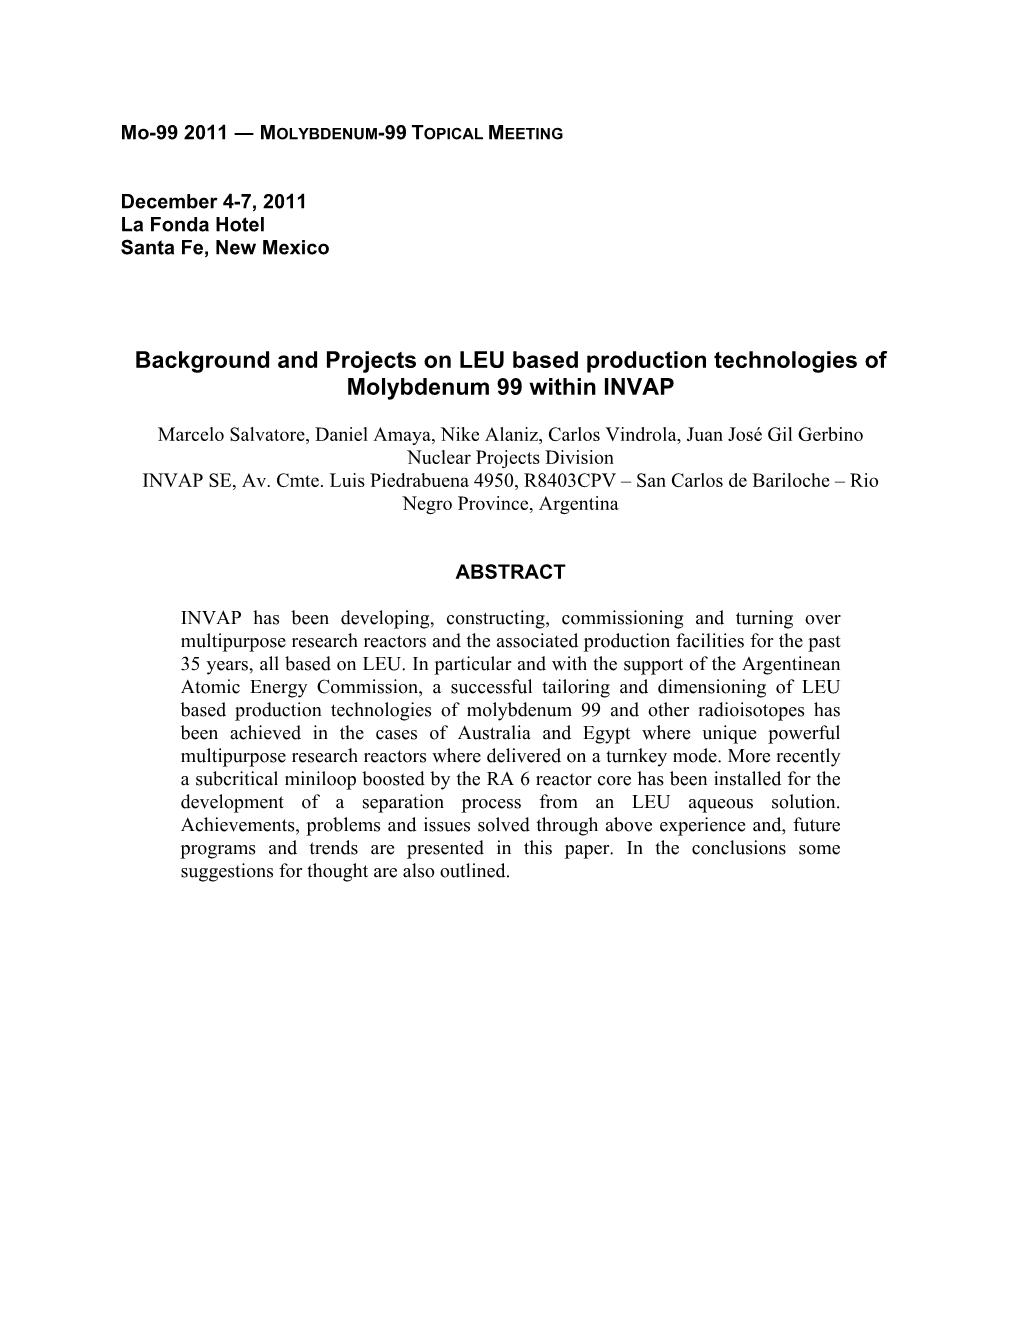 Background and Projects on LEU Based Production Technologies of Molybdenum 99 Within INVAP